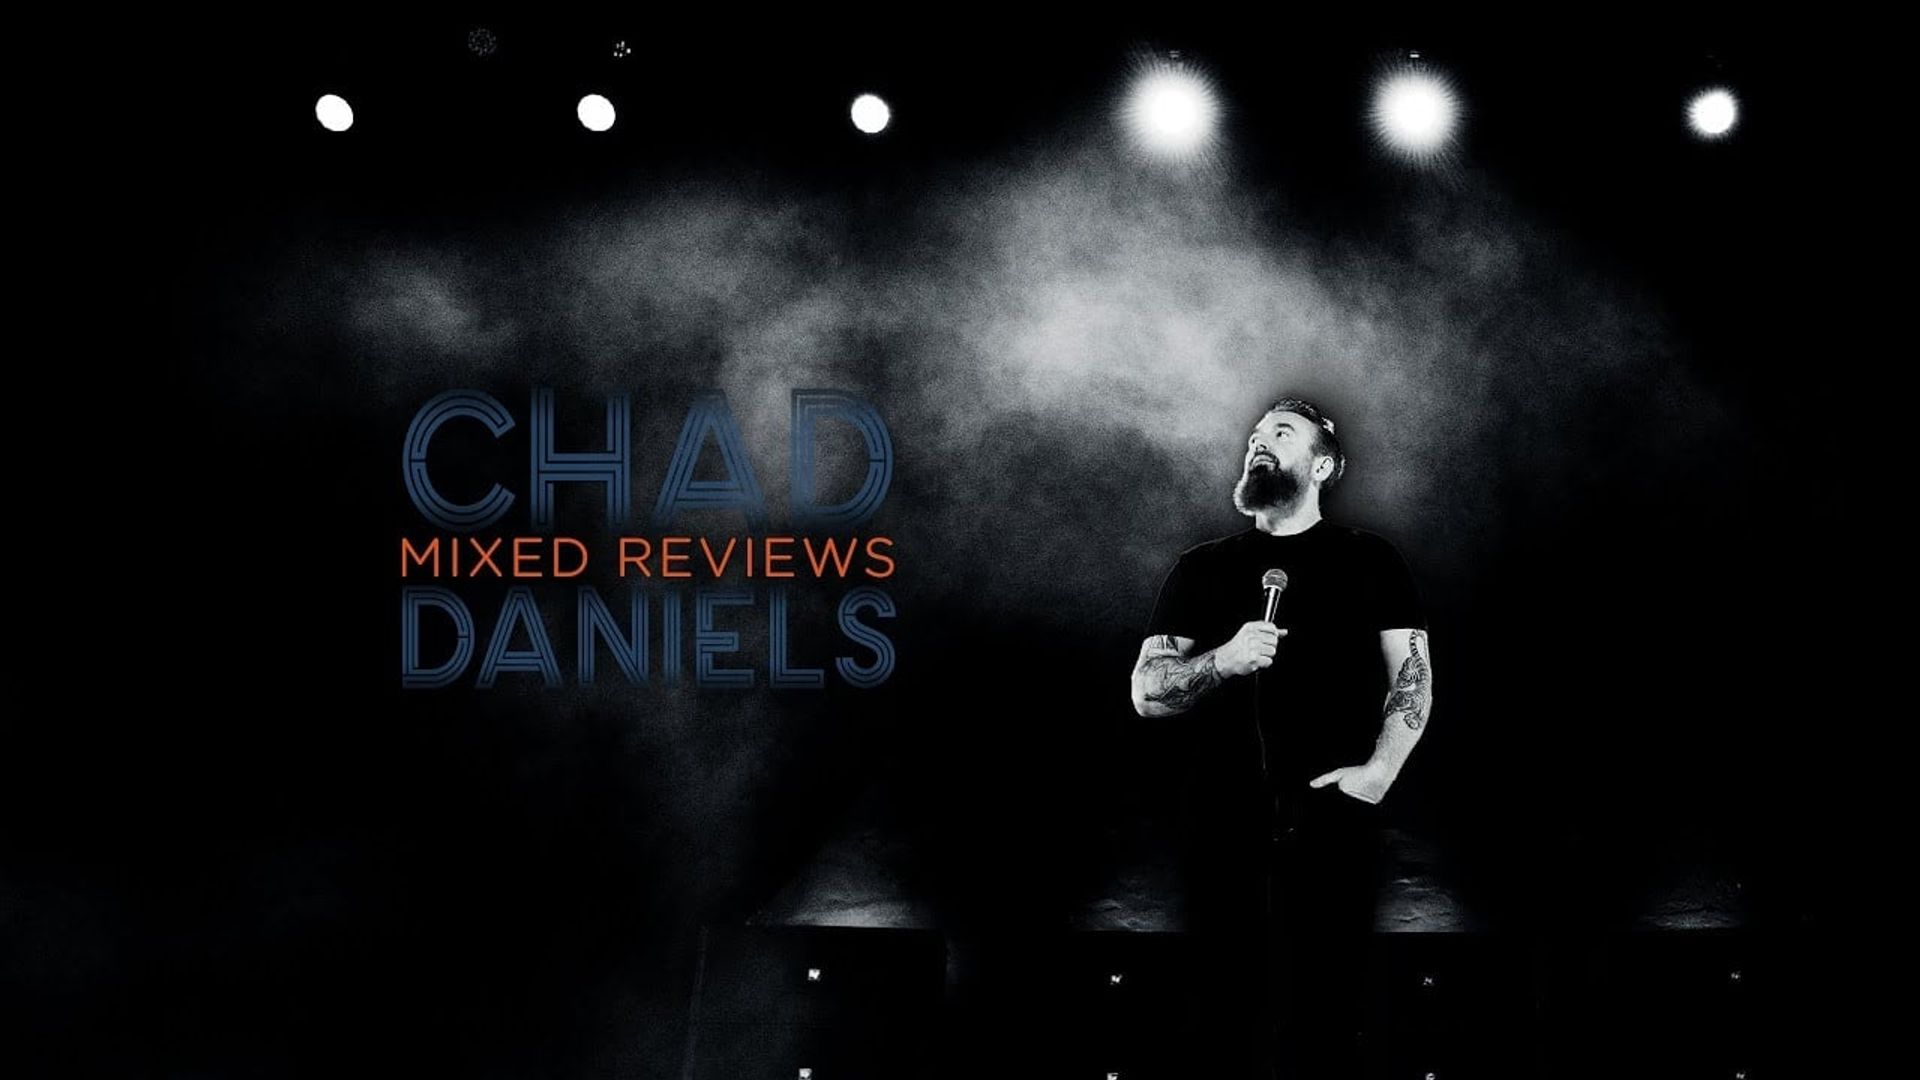 Chad Daniels: Mixed Reivews background